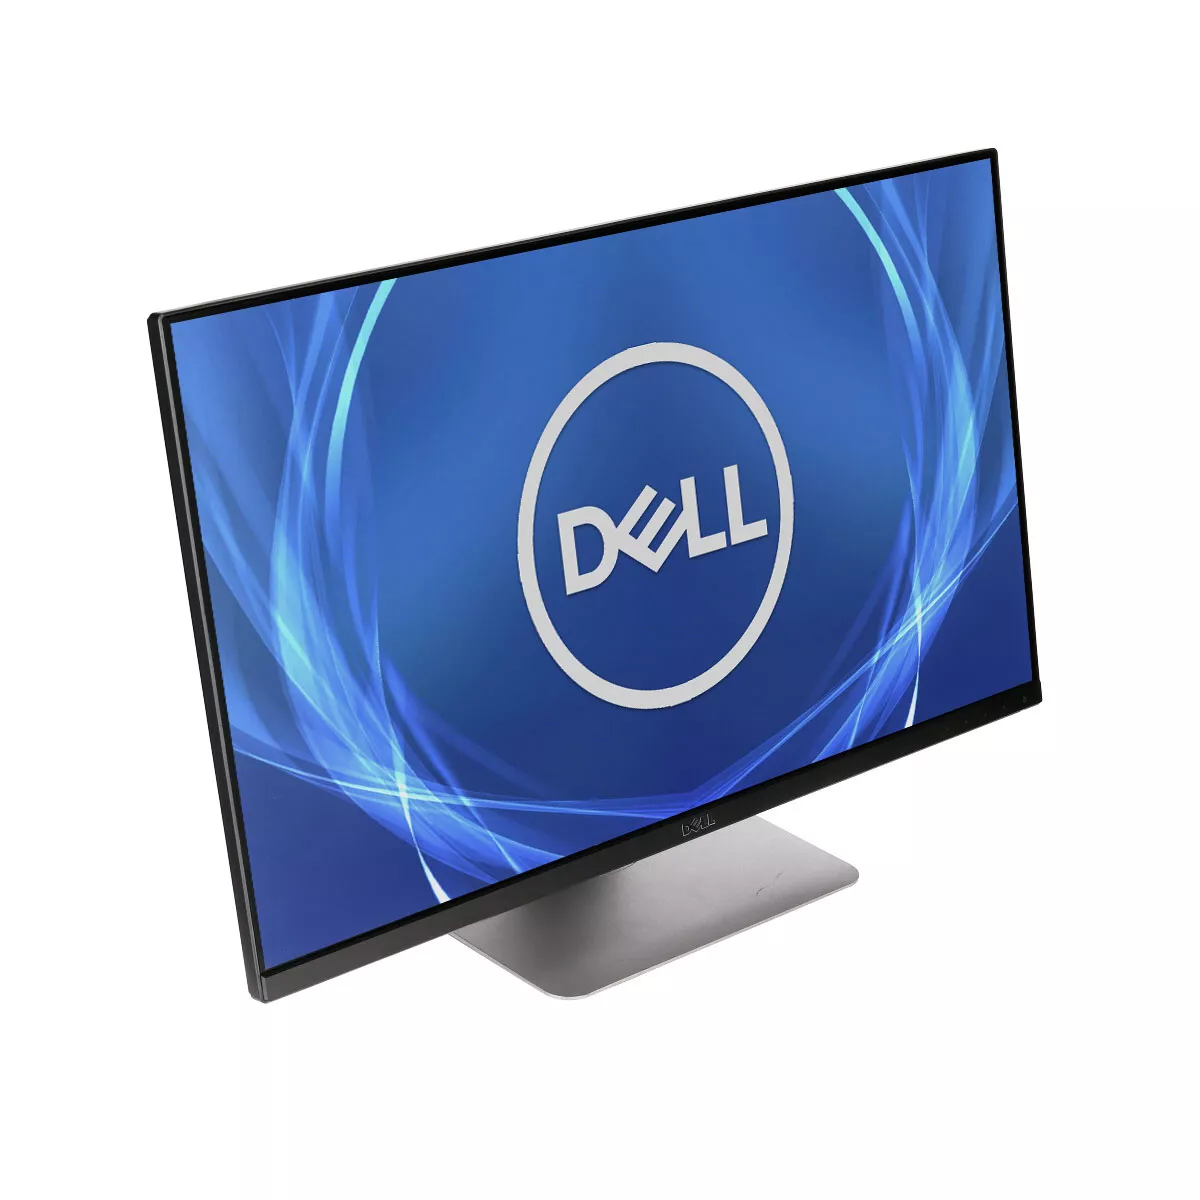 Dell P2719h 27 Zoll 1920x1080 IPS LED schwarz A+